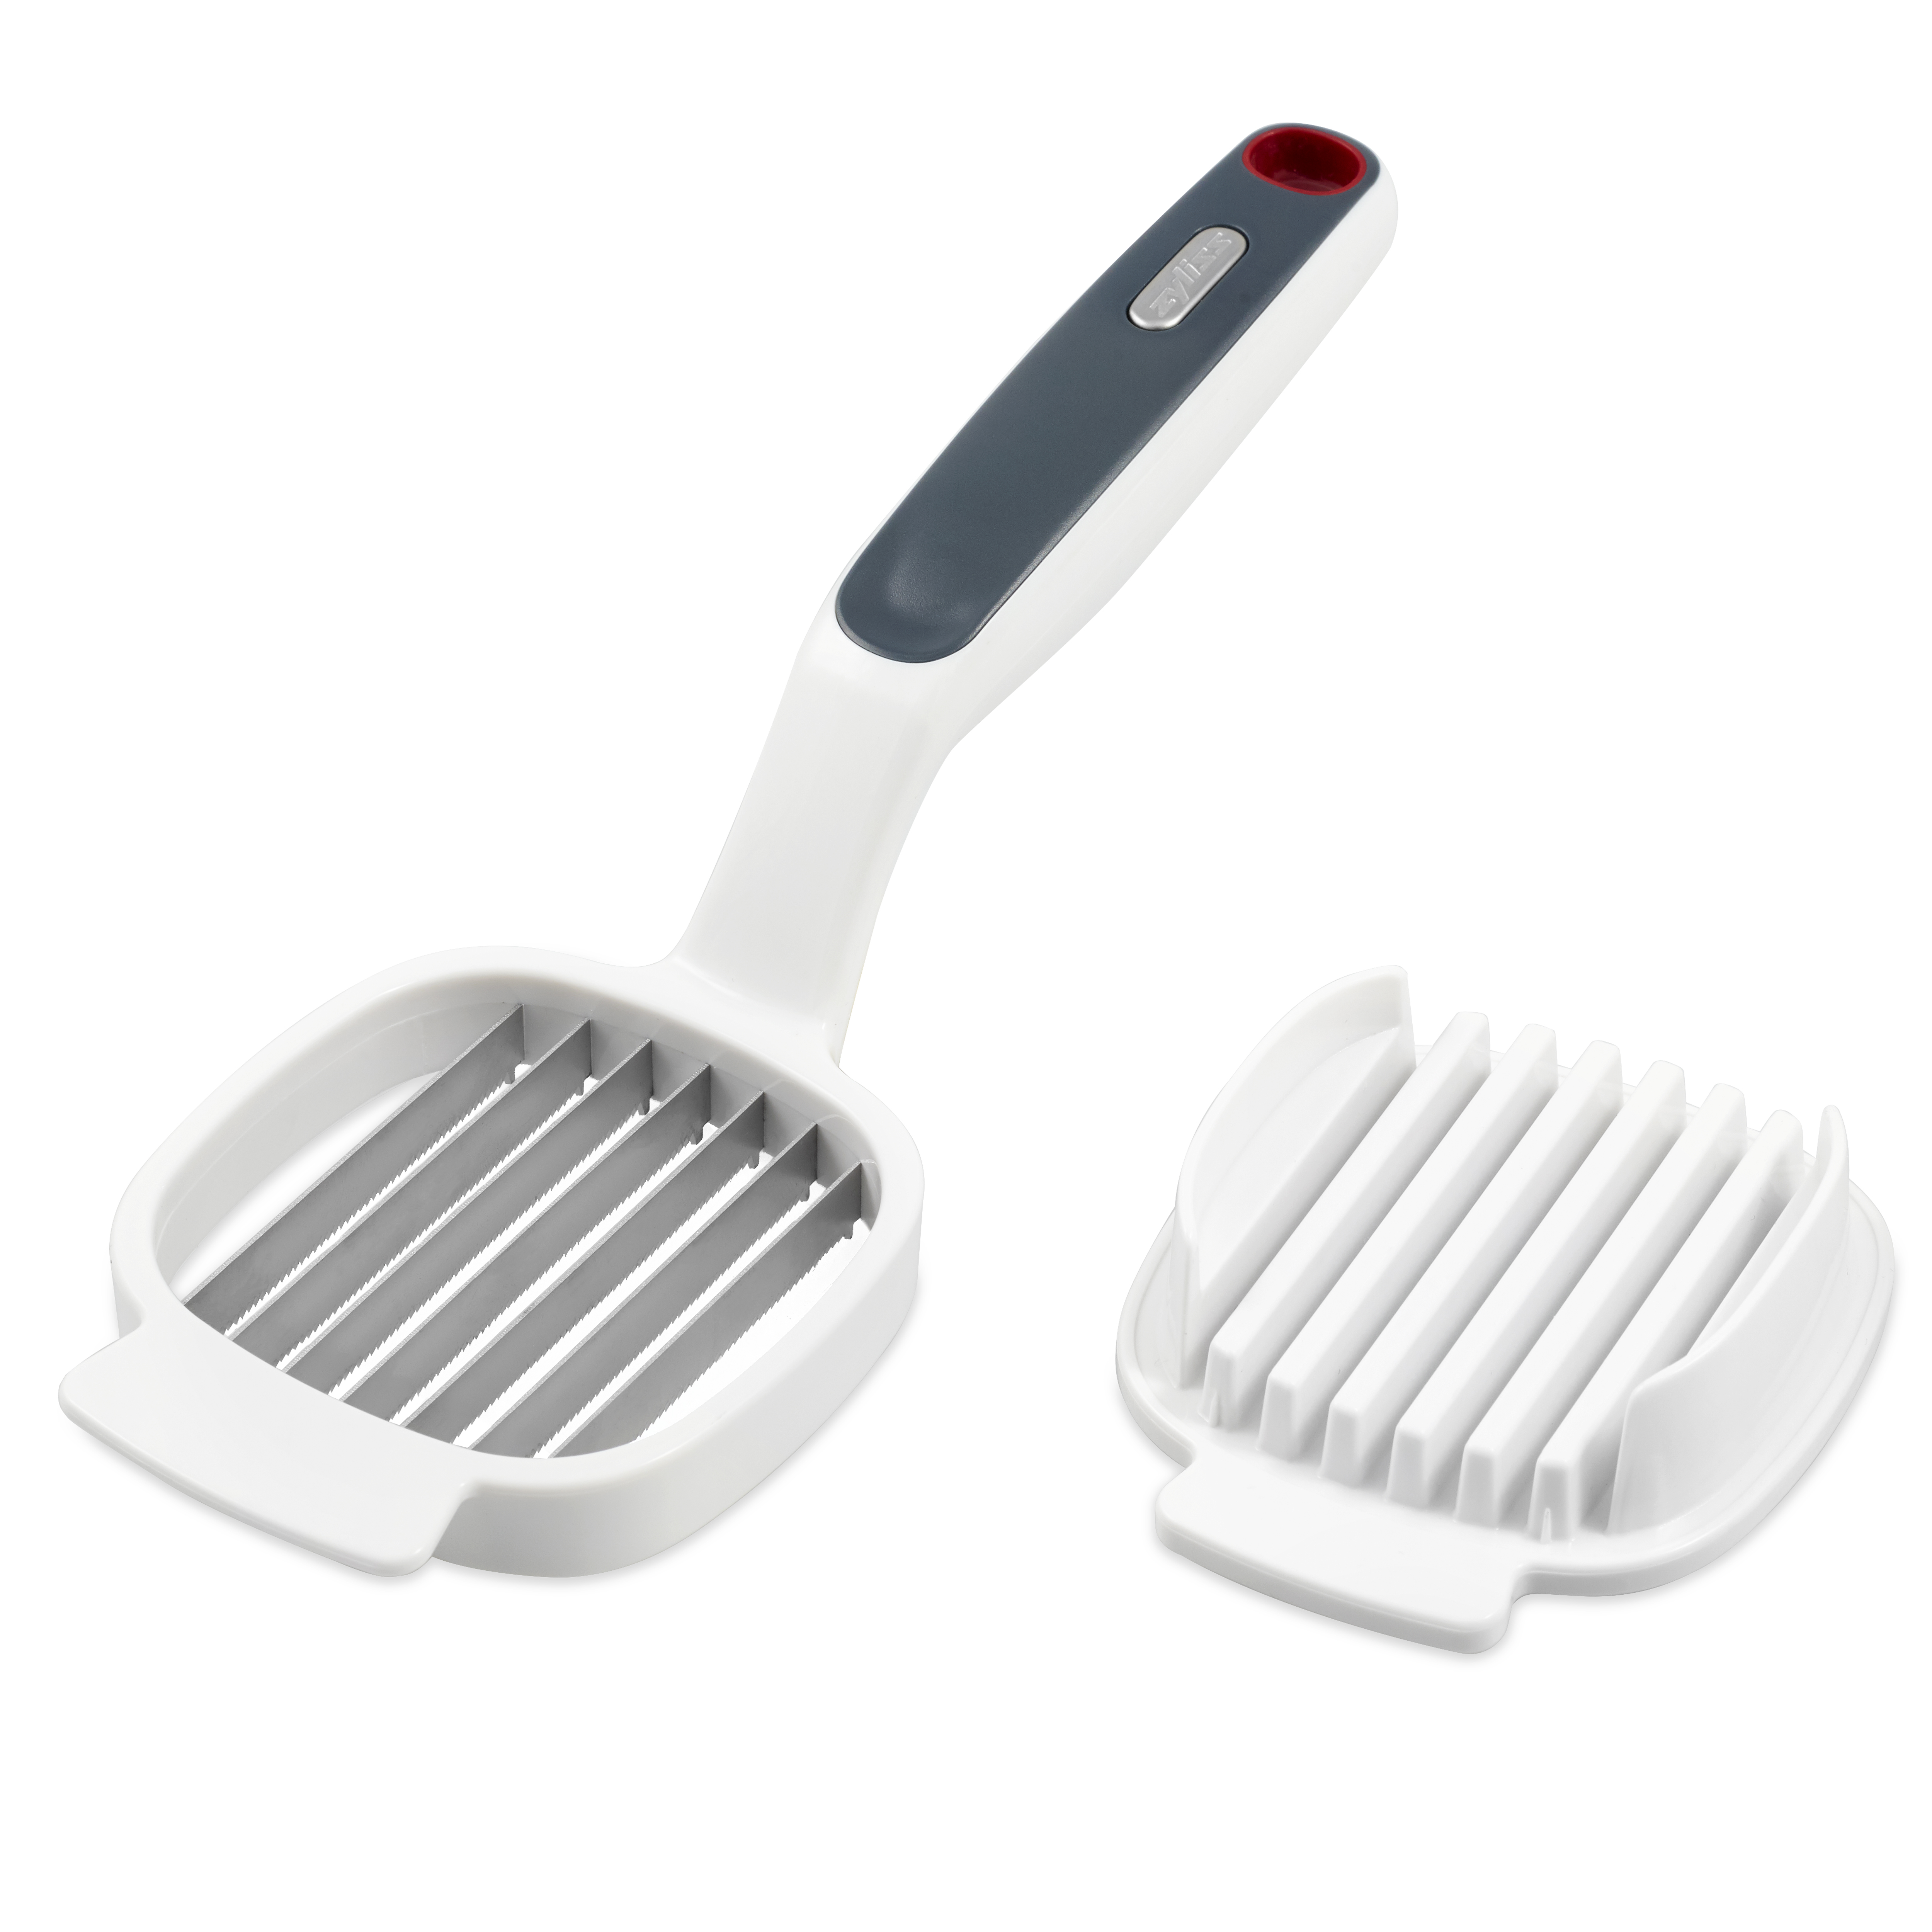 Zyliss Quick Food Slicer